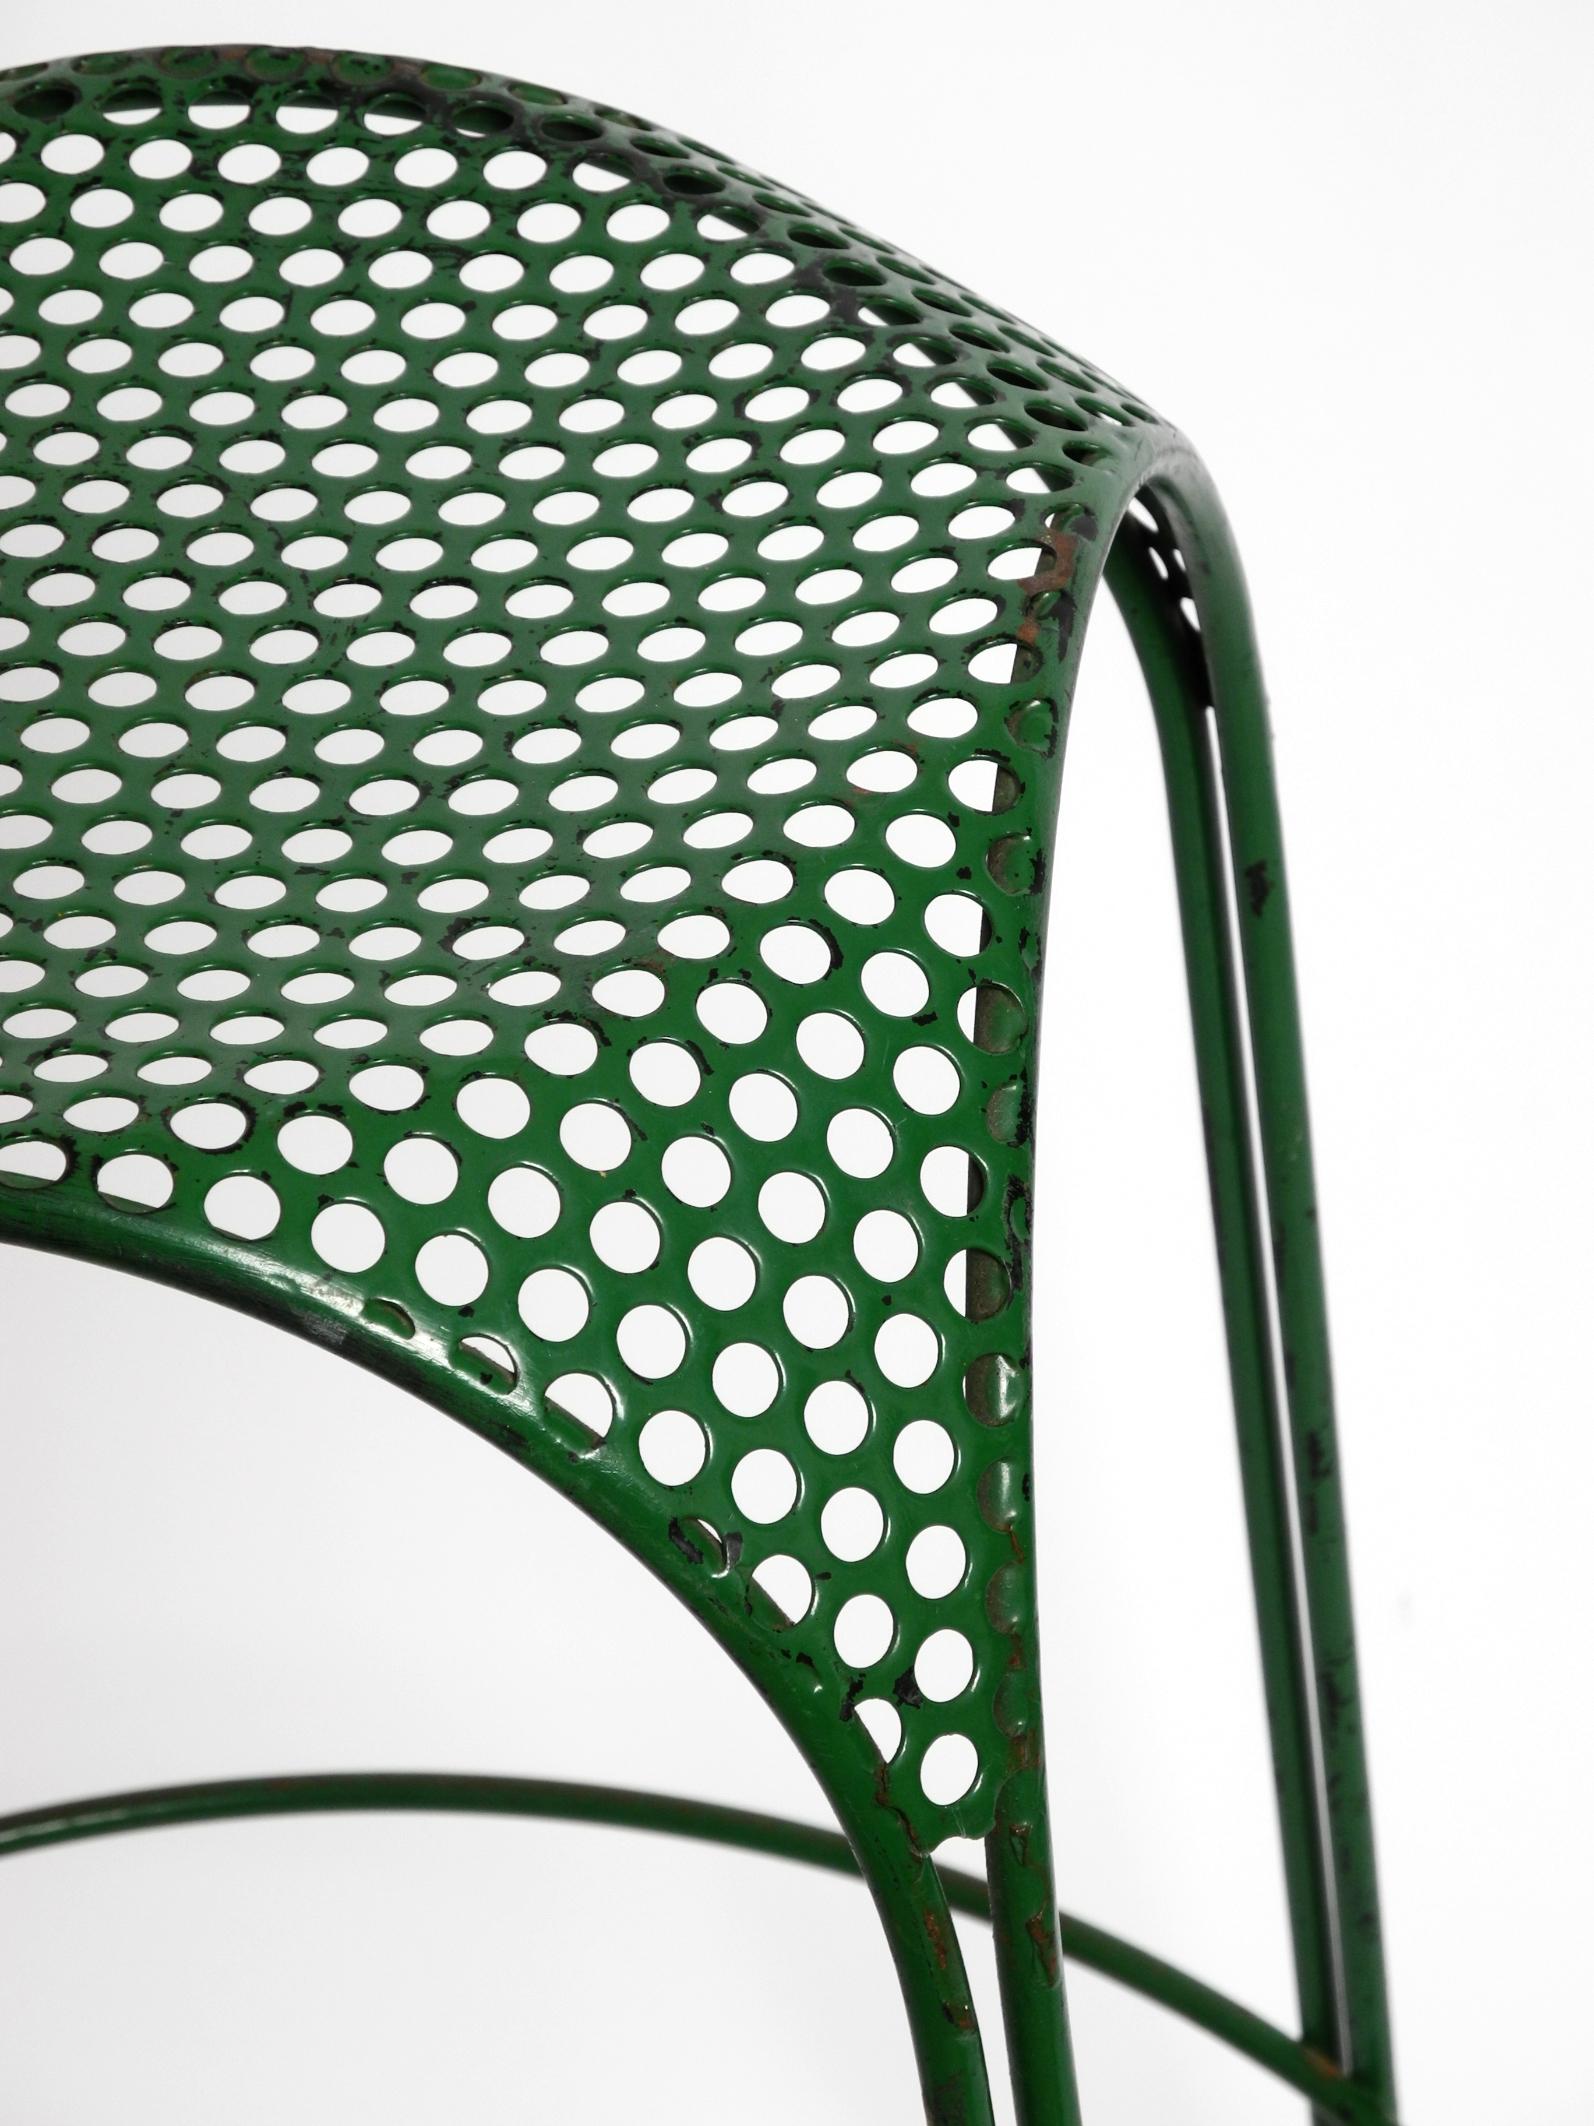 Italian 1960s bar stool made of green painted metal with perforated metal seat For Sale 1